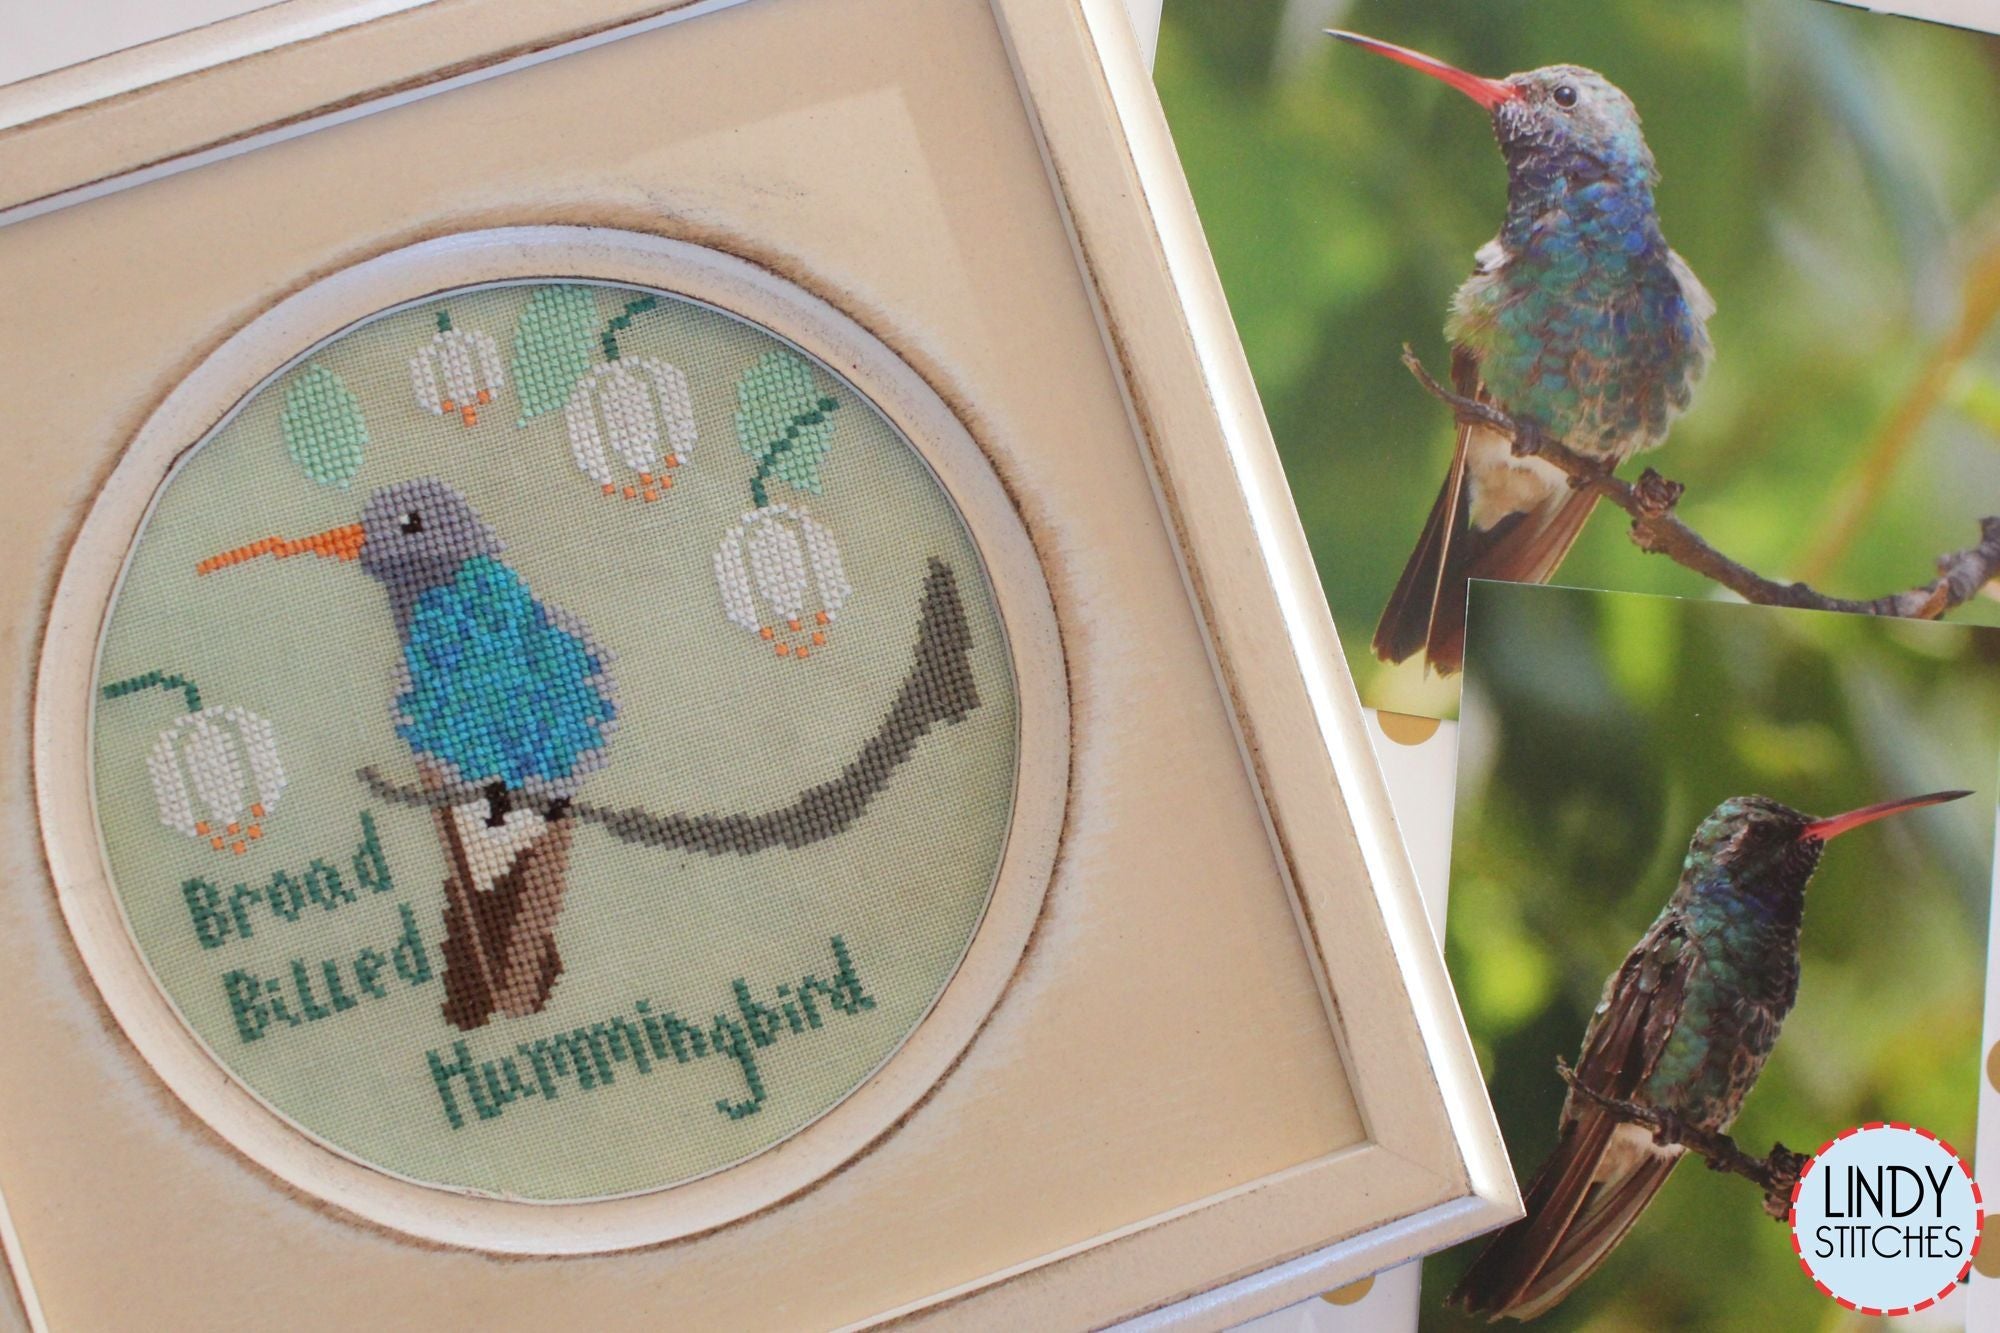 Broad Billed Hummingbird by Lindy Stitches